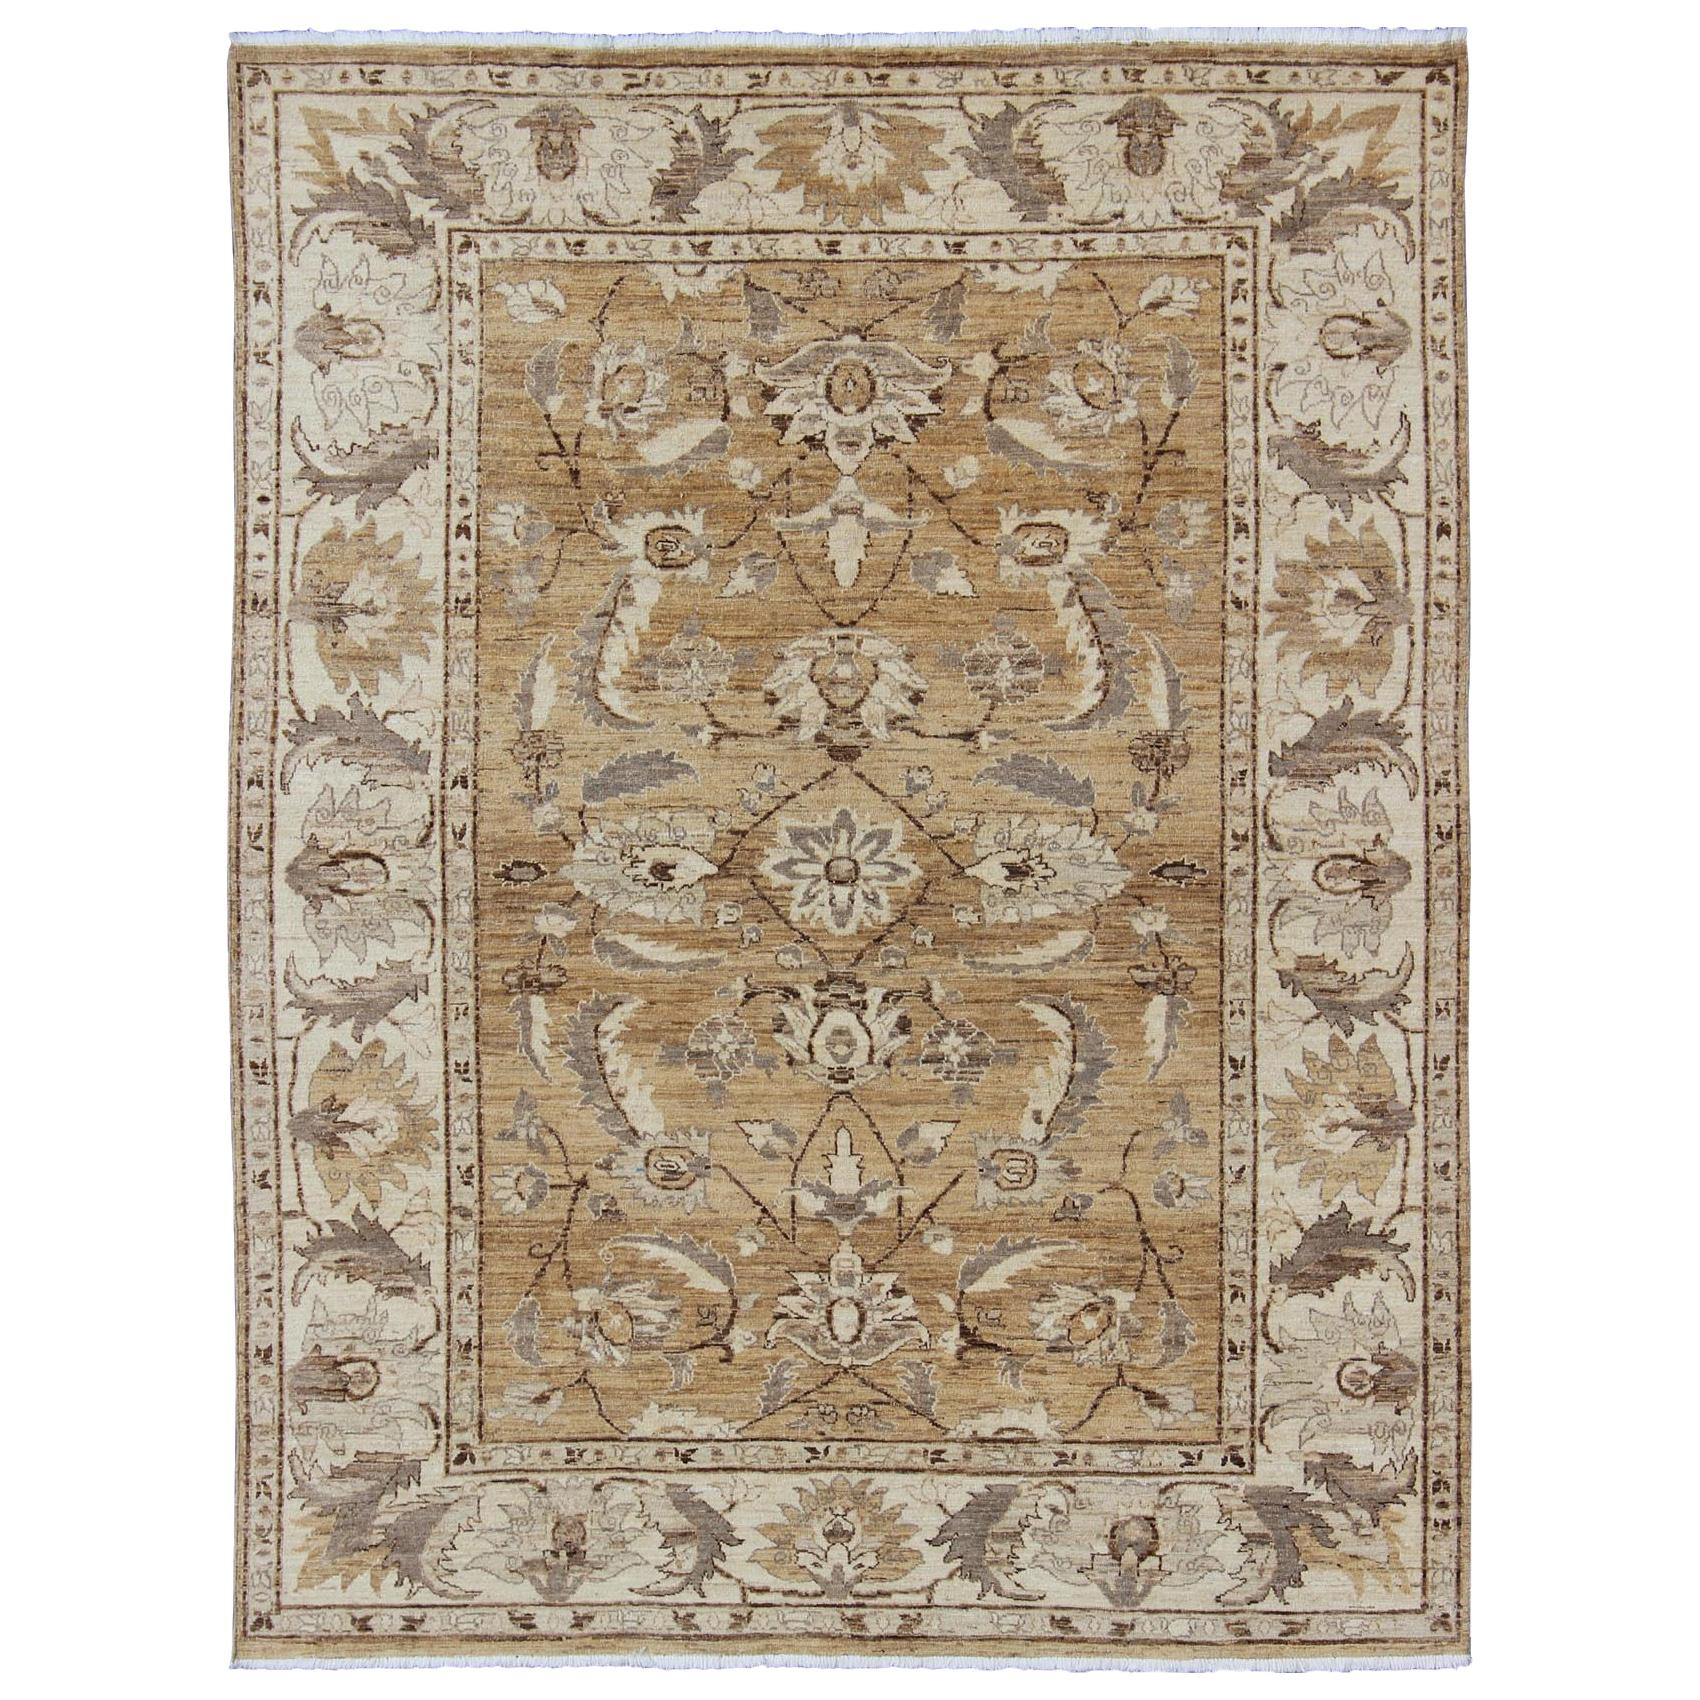 Modern Afghan Floral Pattern in Earth Tones with Browns and Cream